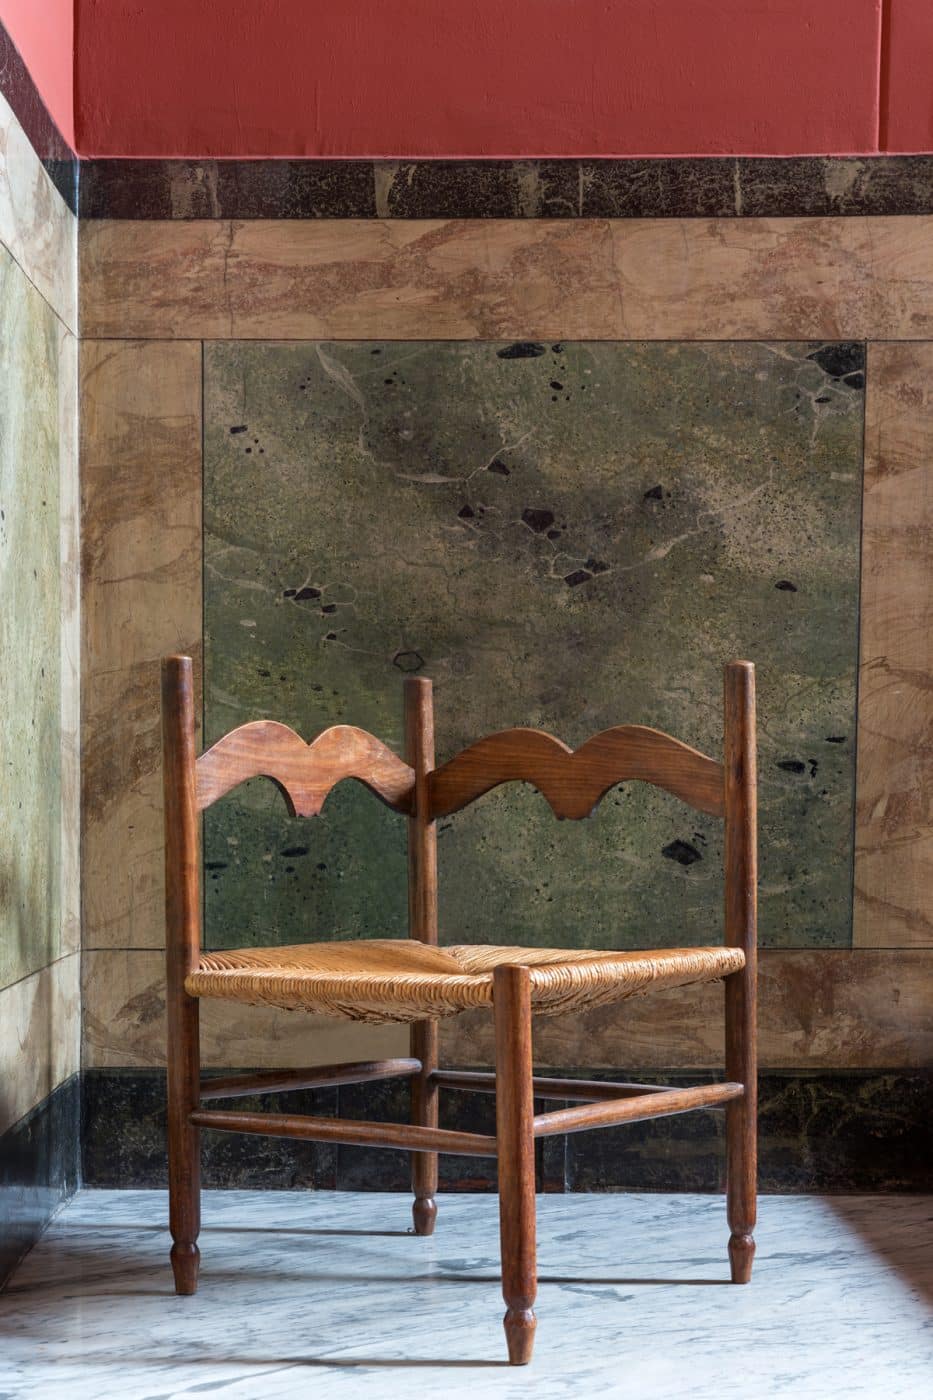 A French oak corner chair with a rush seat photographed against the colorful stone wall in the hallway of Jenny Walton's Milan apartment building